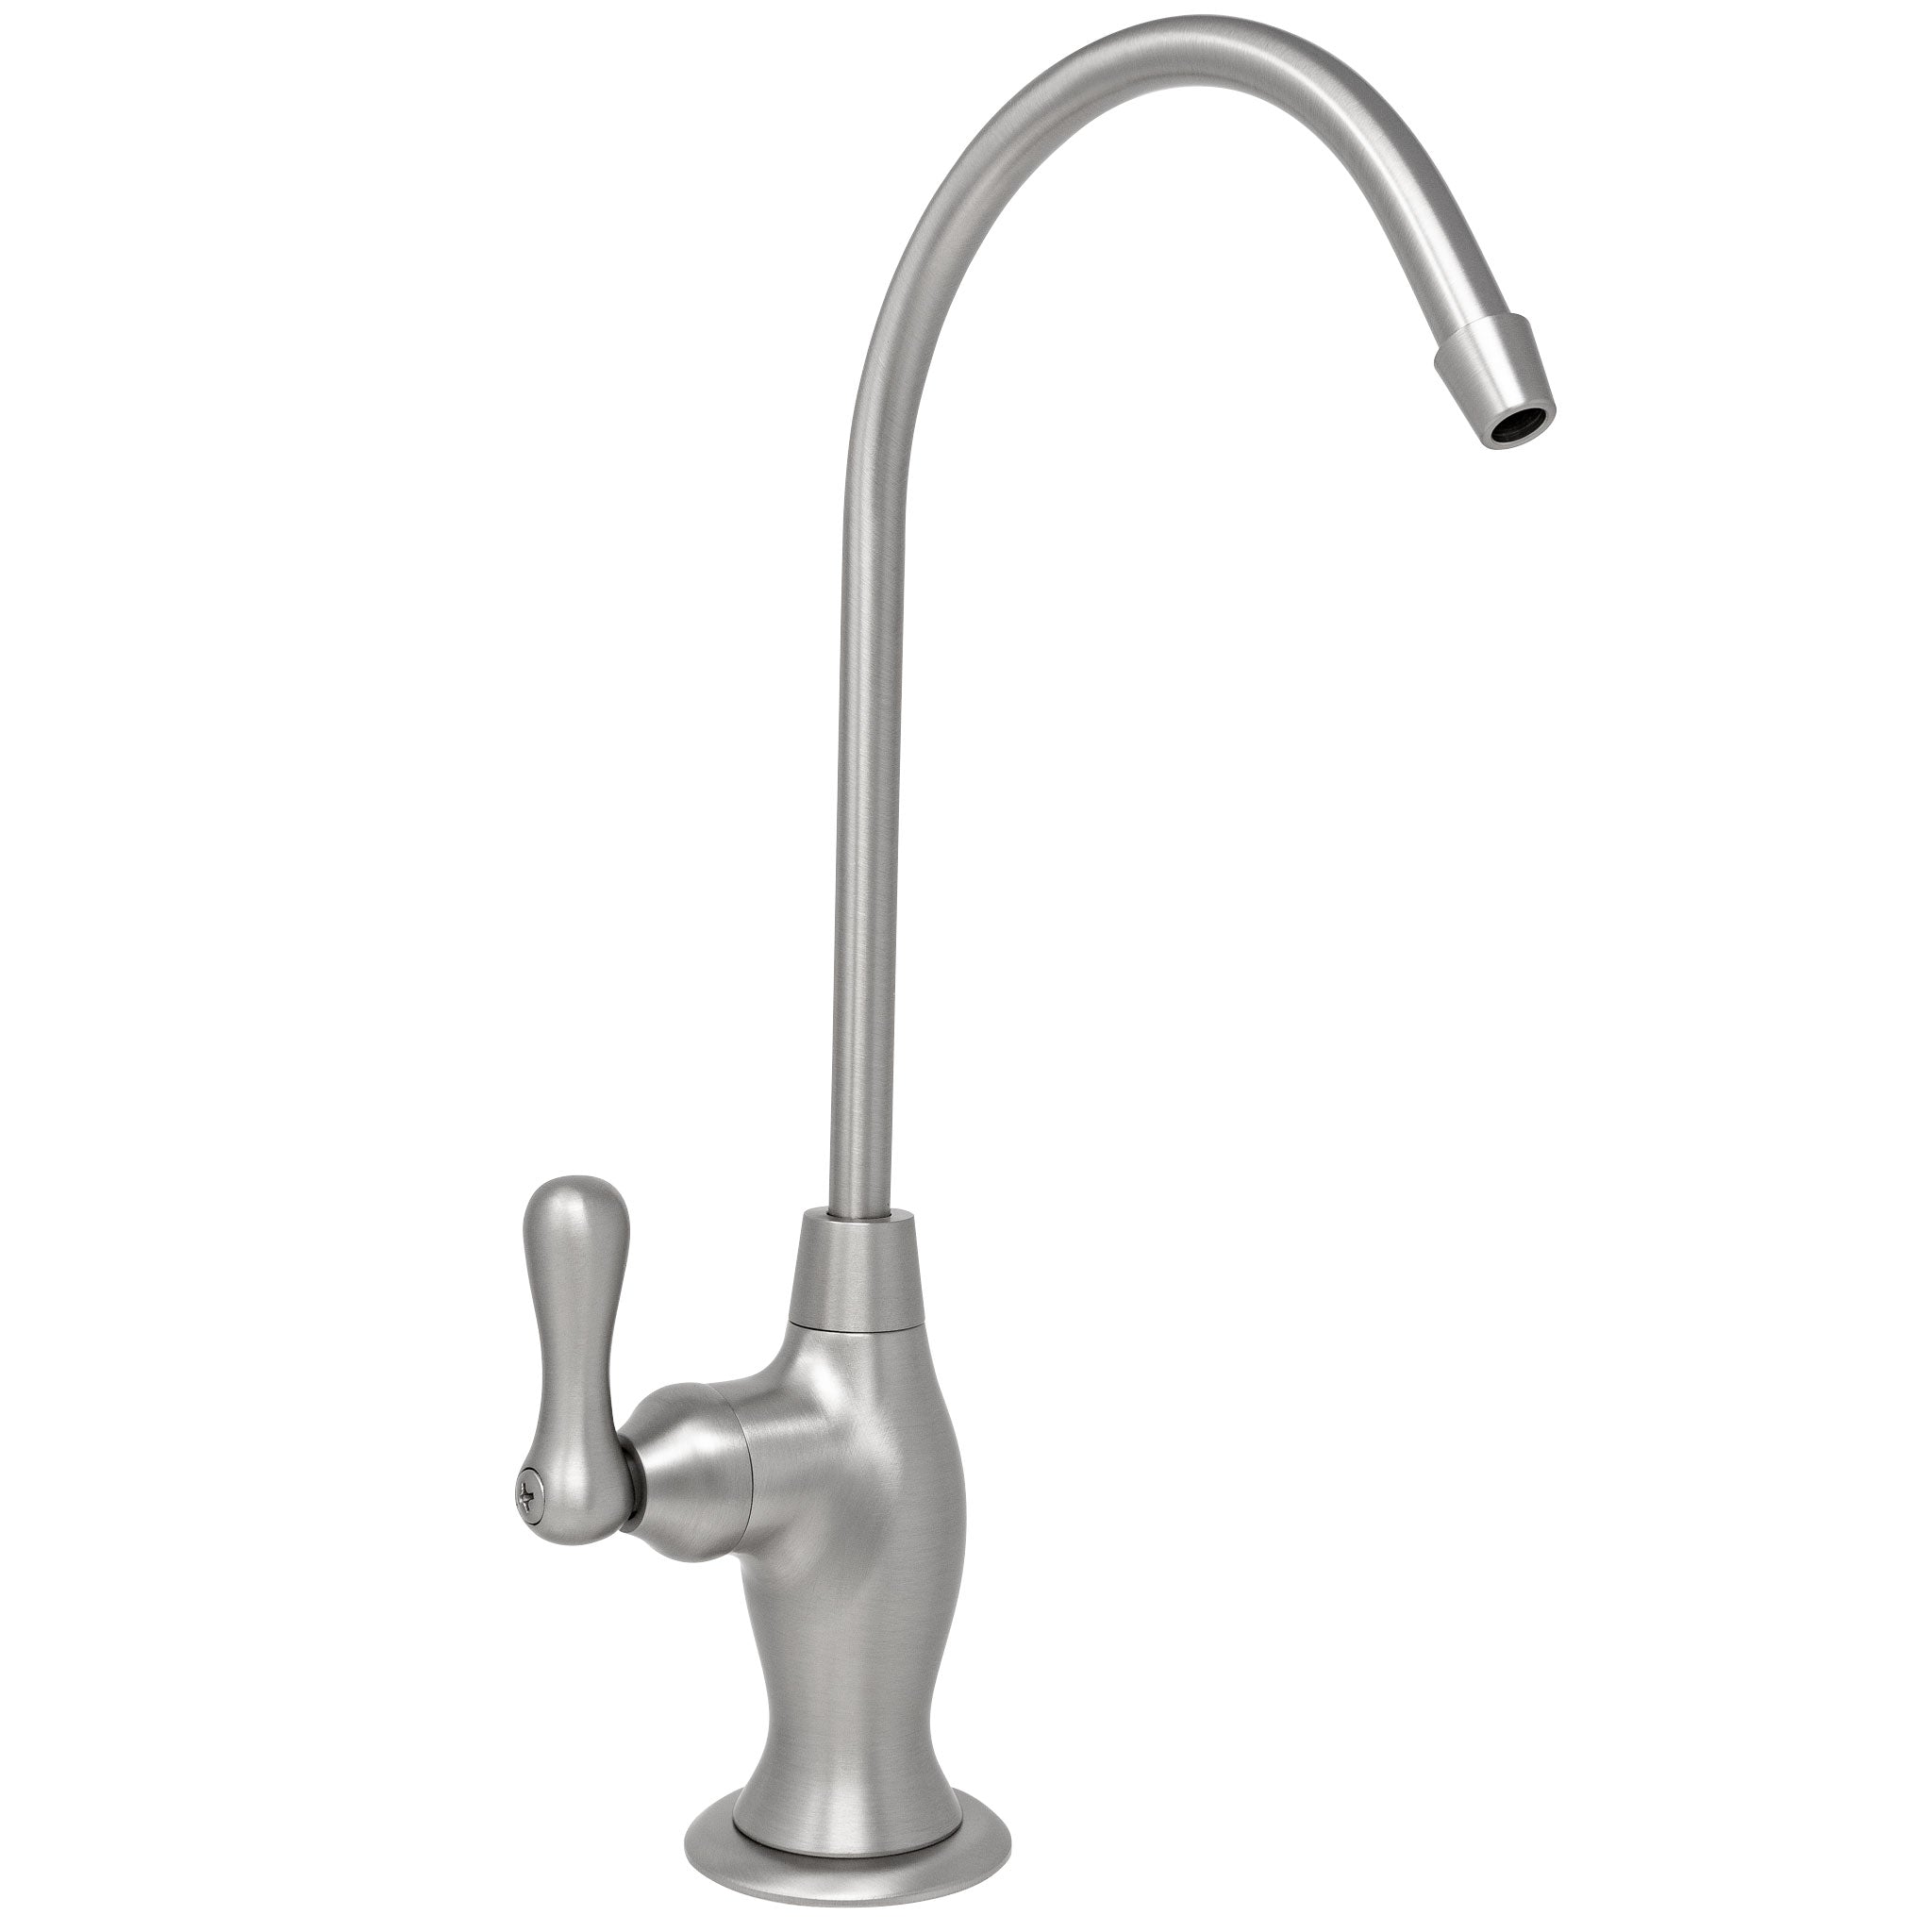 Water Filtration Faucet Vase Style Stainless Steel Reverse Osmosis Non Air Gap. Certified by NSF.